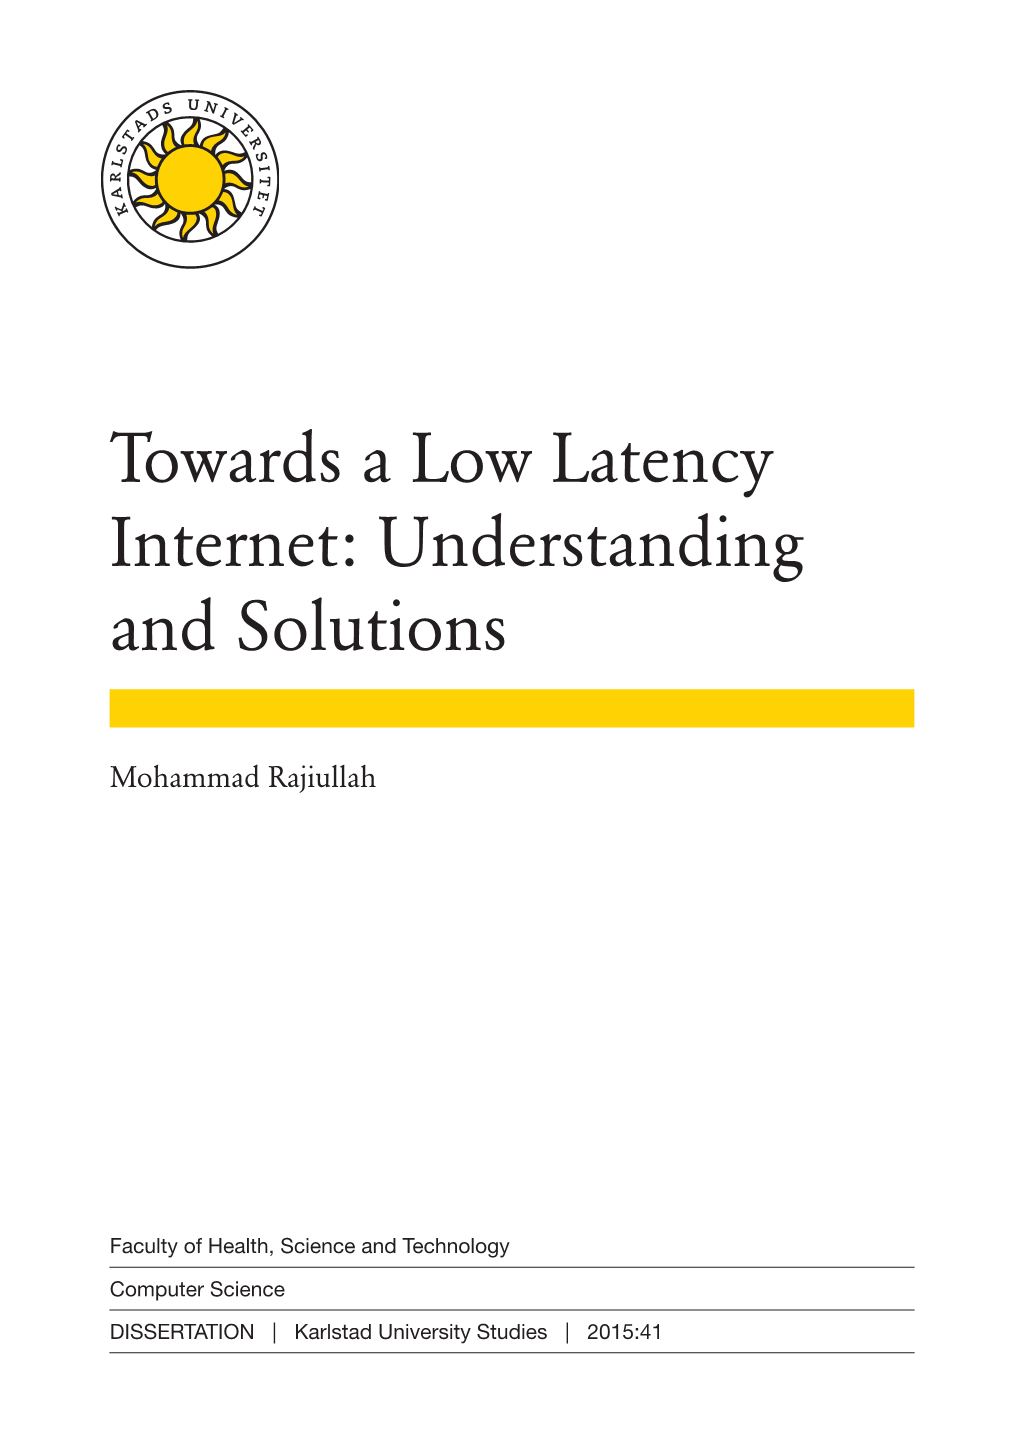 Towards a Low Latency Internet: Understanding and Solutions | 2015:41